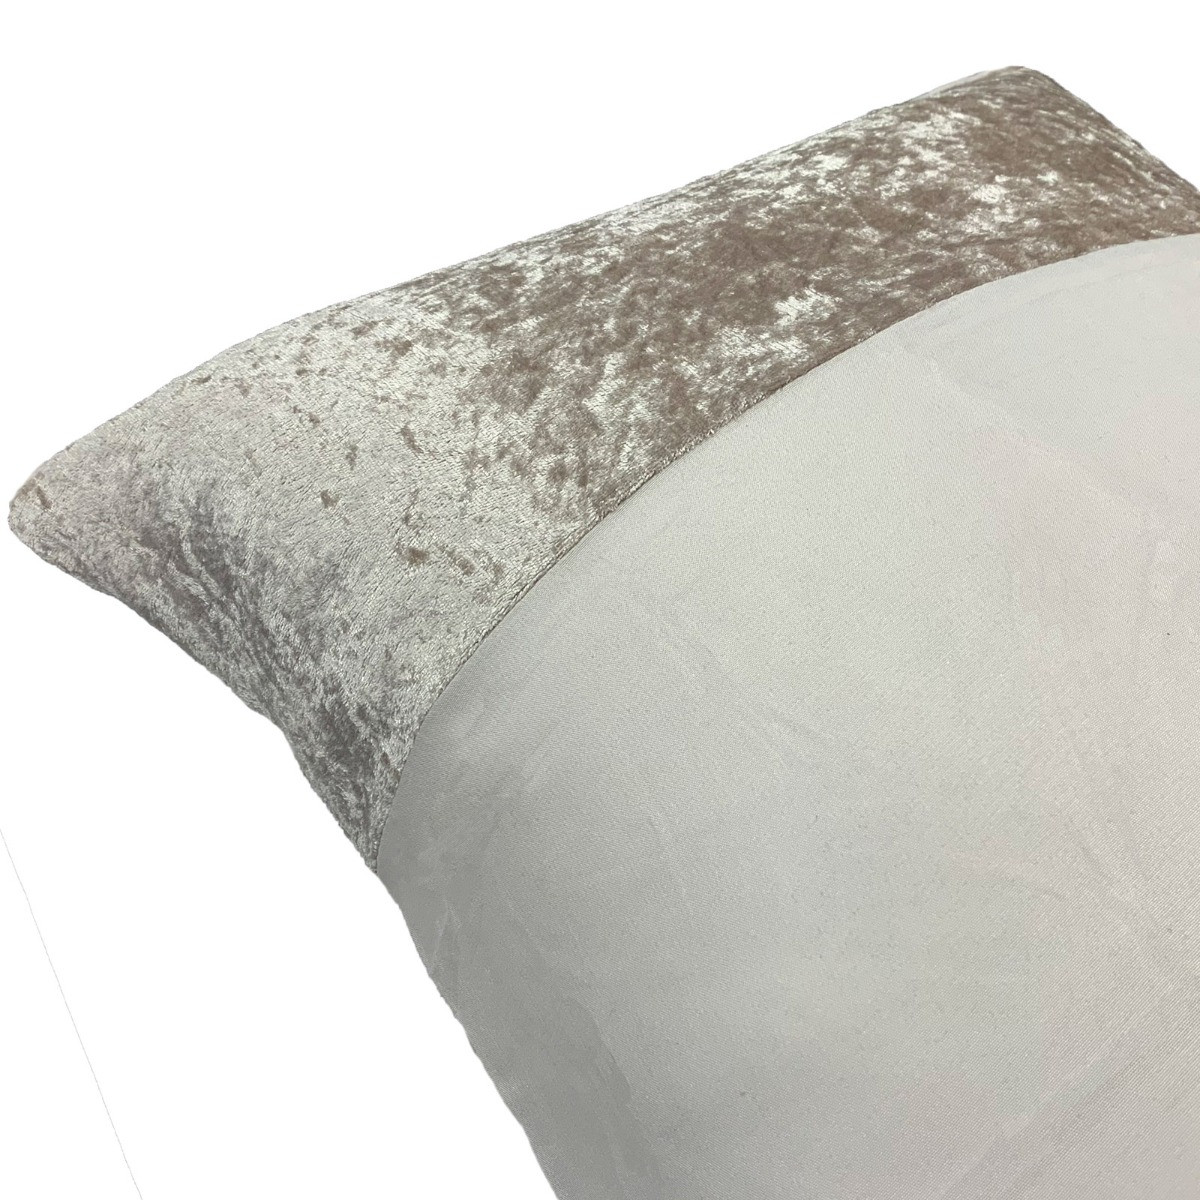 Sienna Crushed Velvet Band 4 Pack of Pillowcases - Natural Gold>